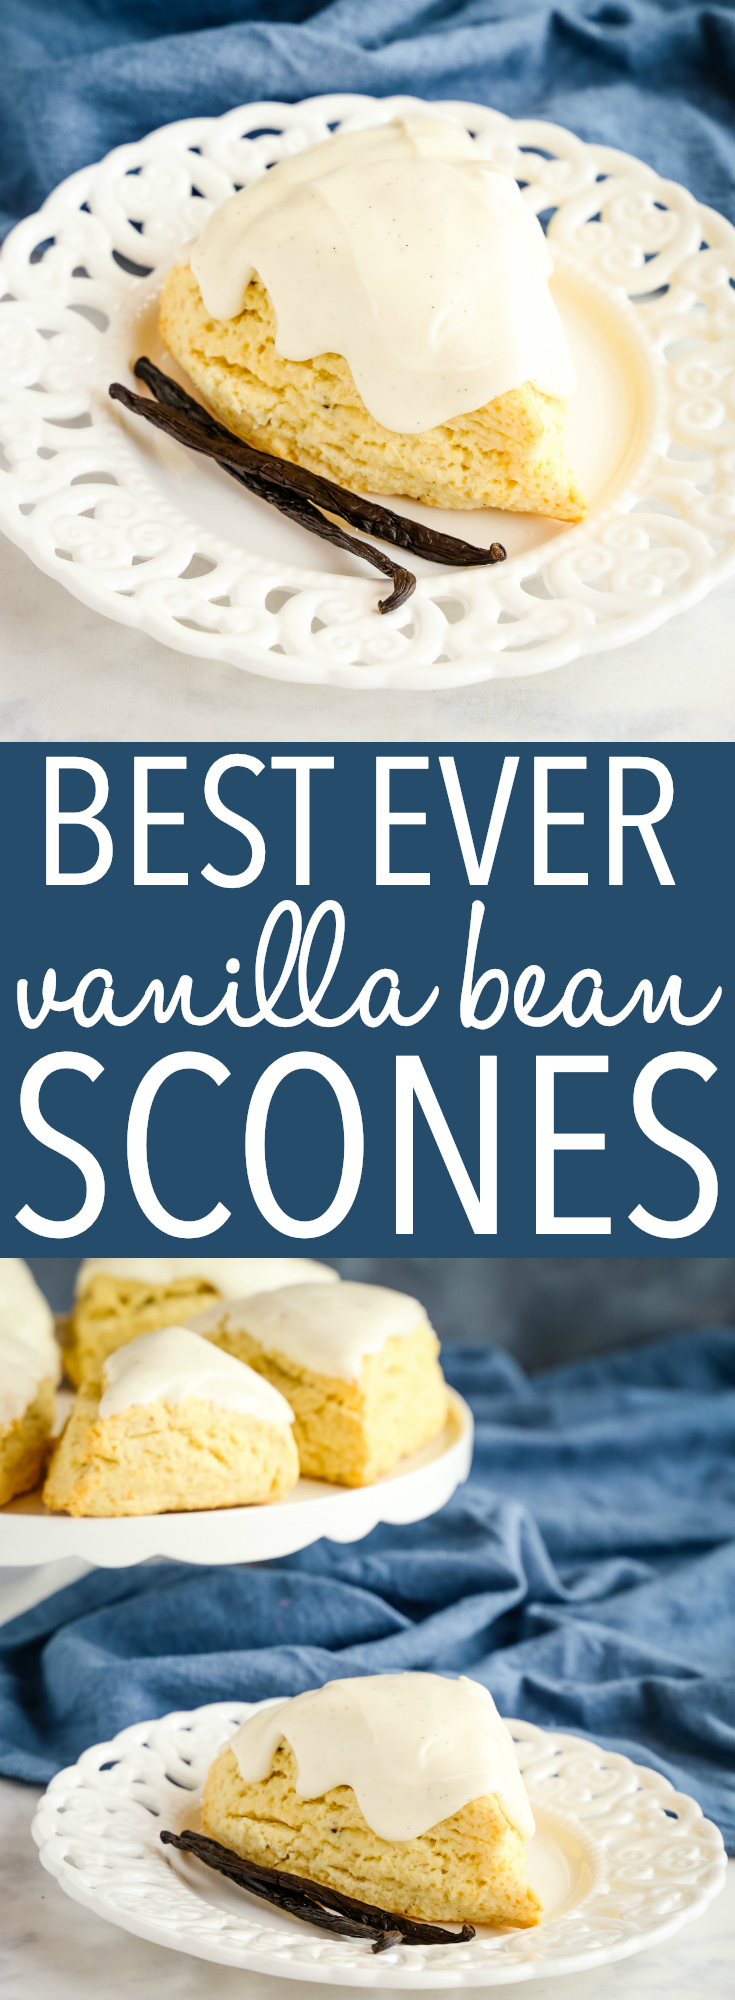 These Best Ever Vanilla Bean Scones are the perfect make-at-home coffee shop treat for vanilla lovers! Follow all my pro tips for making the best homemade flaky scones! #scones #baking #homemade #tea #coffee #howtomakescones #bestsconerecipe #recipe #vanilla #vanillabean #vanillaextract #baker #foodblog via @busybakerblog